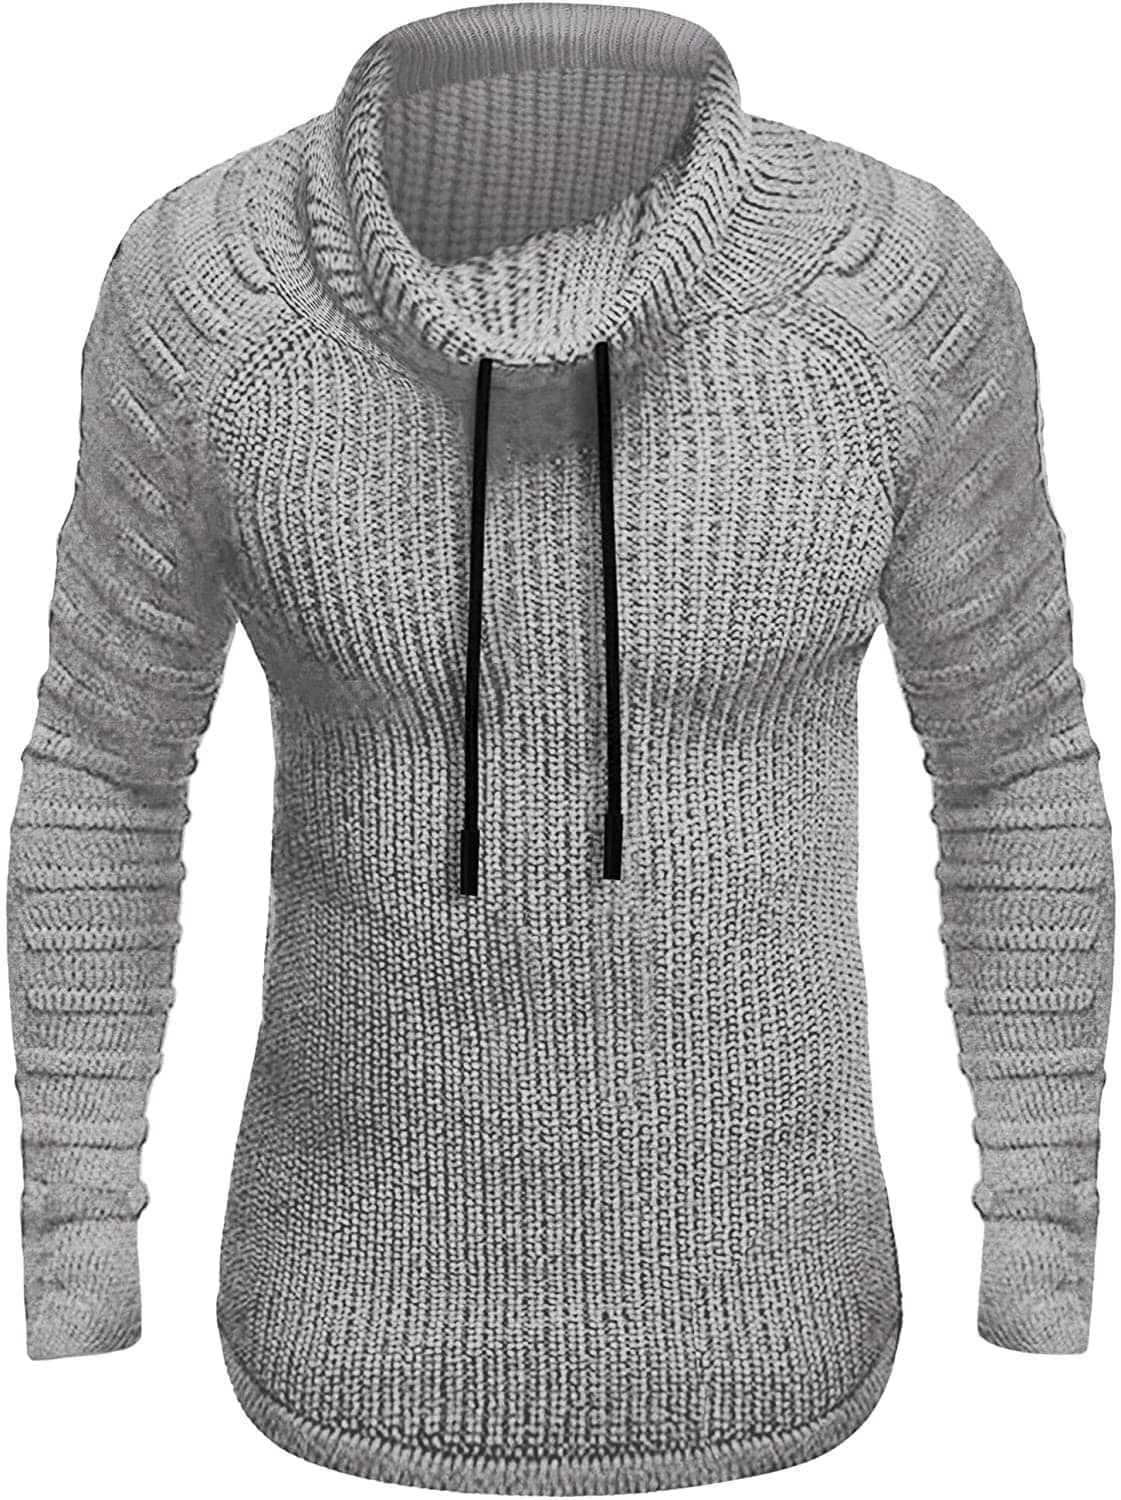 Coofandy Knitted Turtleneck Sweater (US Only) Fashion Hoodies & Sweatshirts COOFANDY Store Light Grey Small 